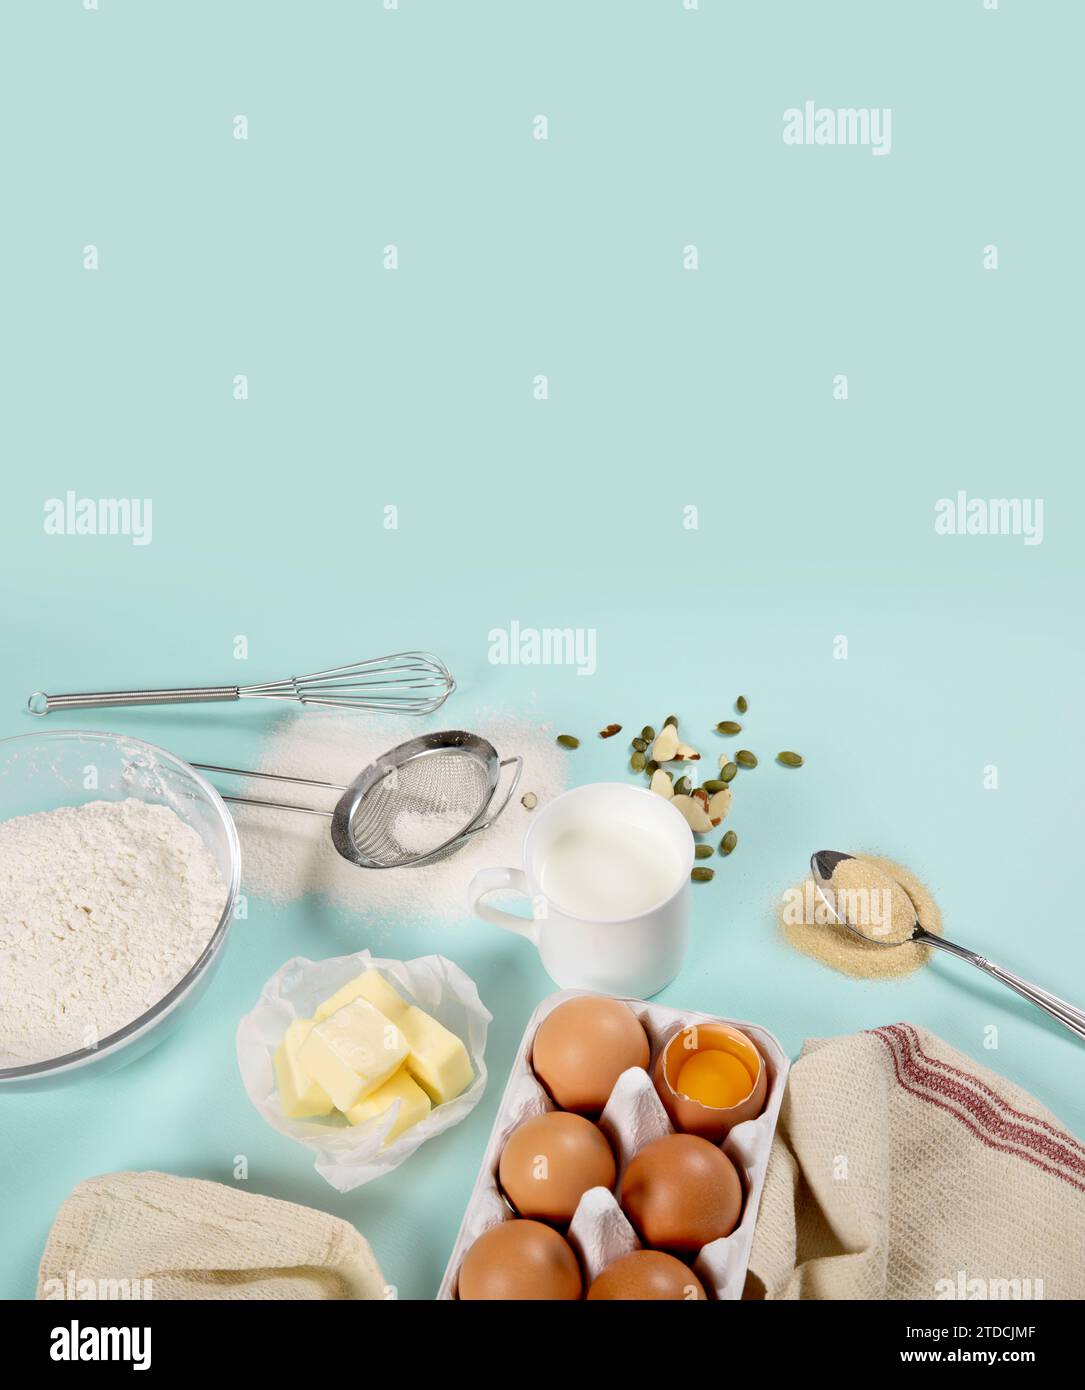 Composition of ingredients for baking on colored paper (eggs, flour, butter, nuts, milk and tools) Stock Photo